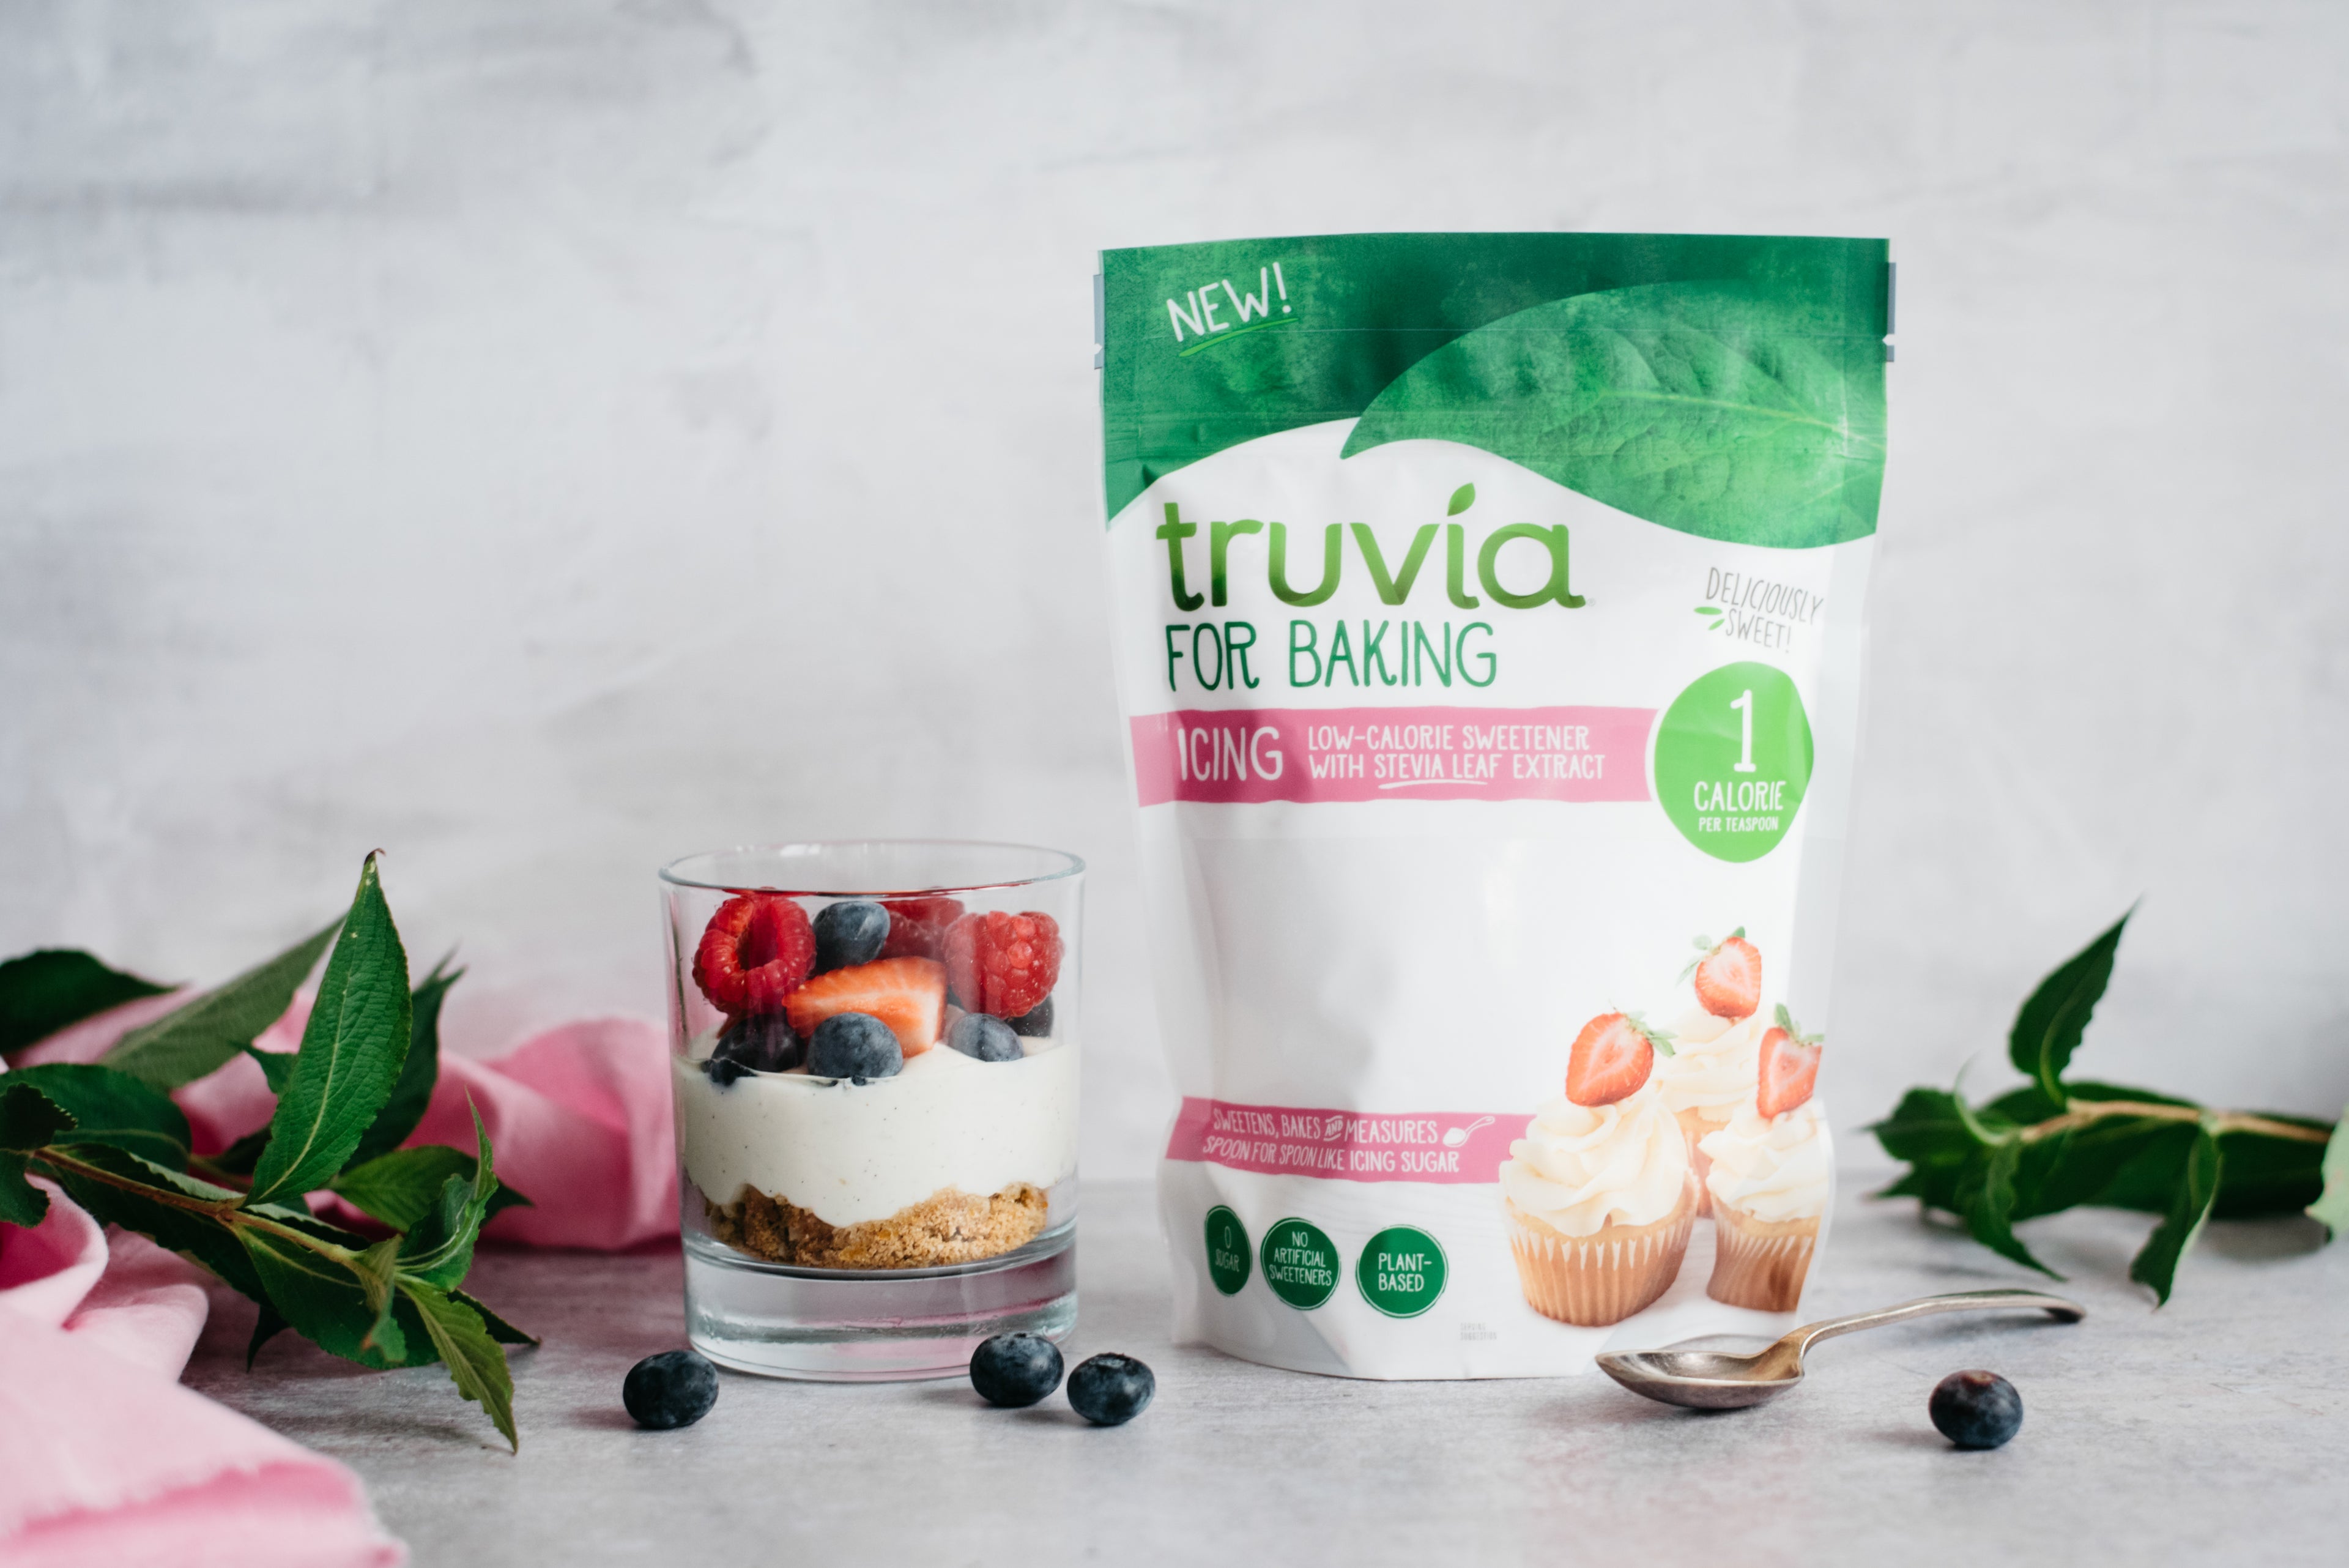 A no bake honey and berry cheesecake in a glass next to a packet of Truvia for baking - icing